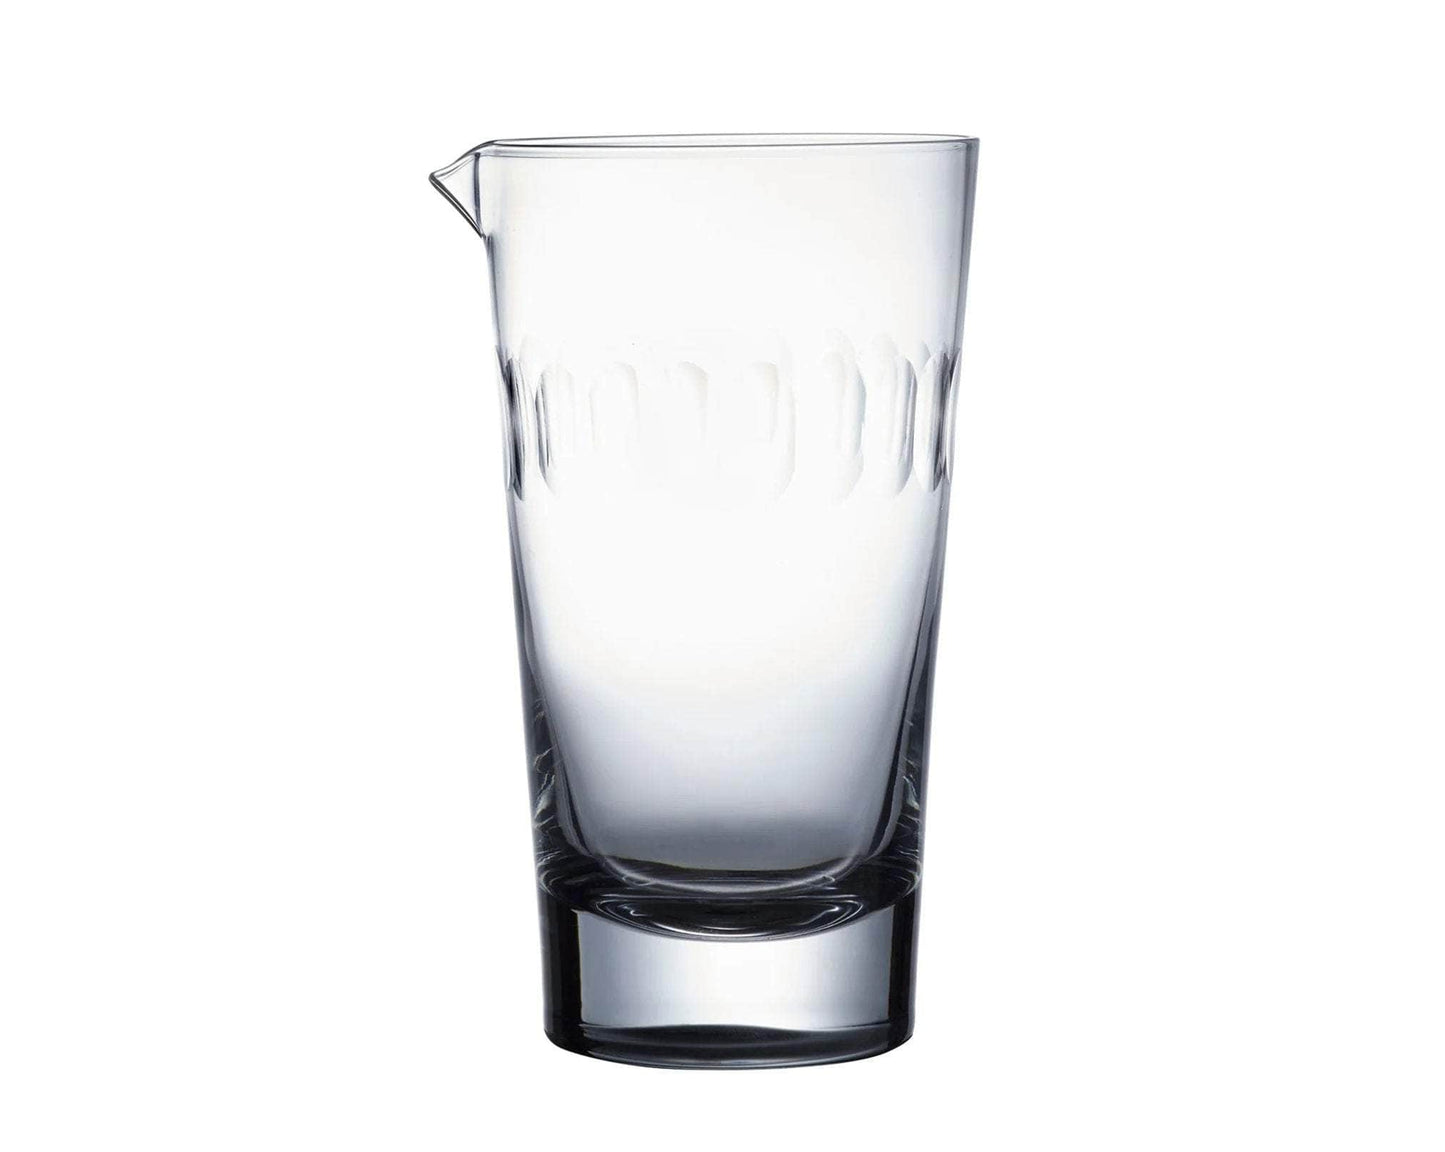 A Mixing Glass with Lens Design